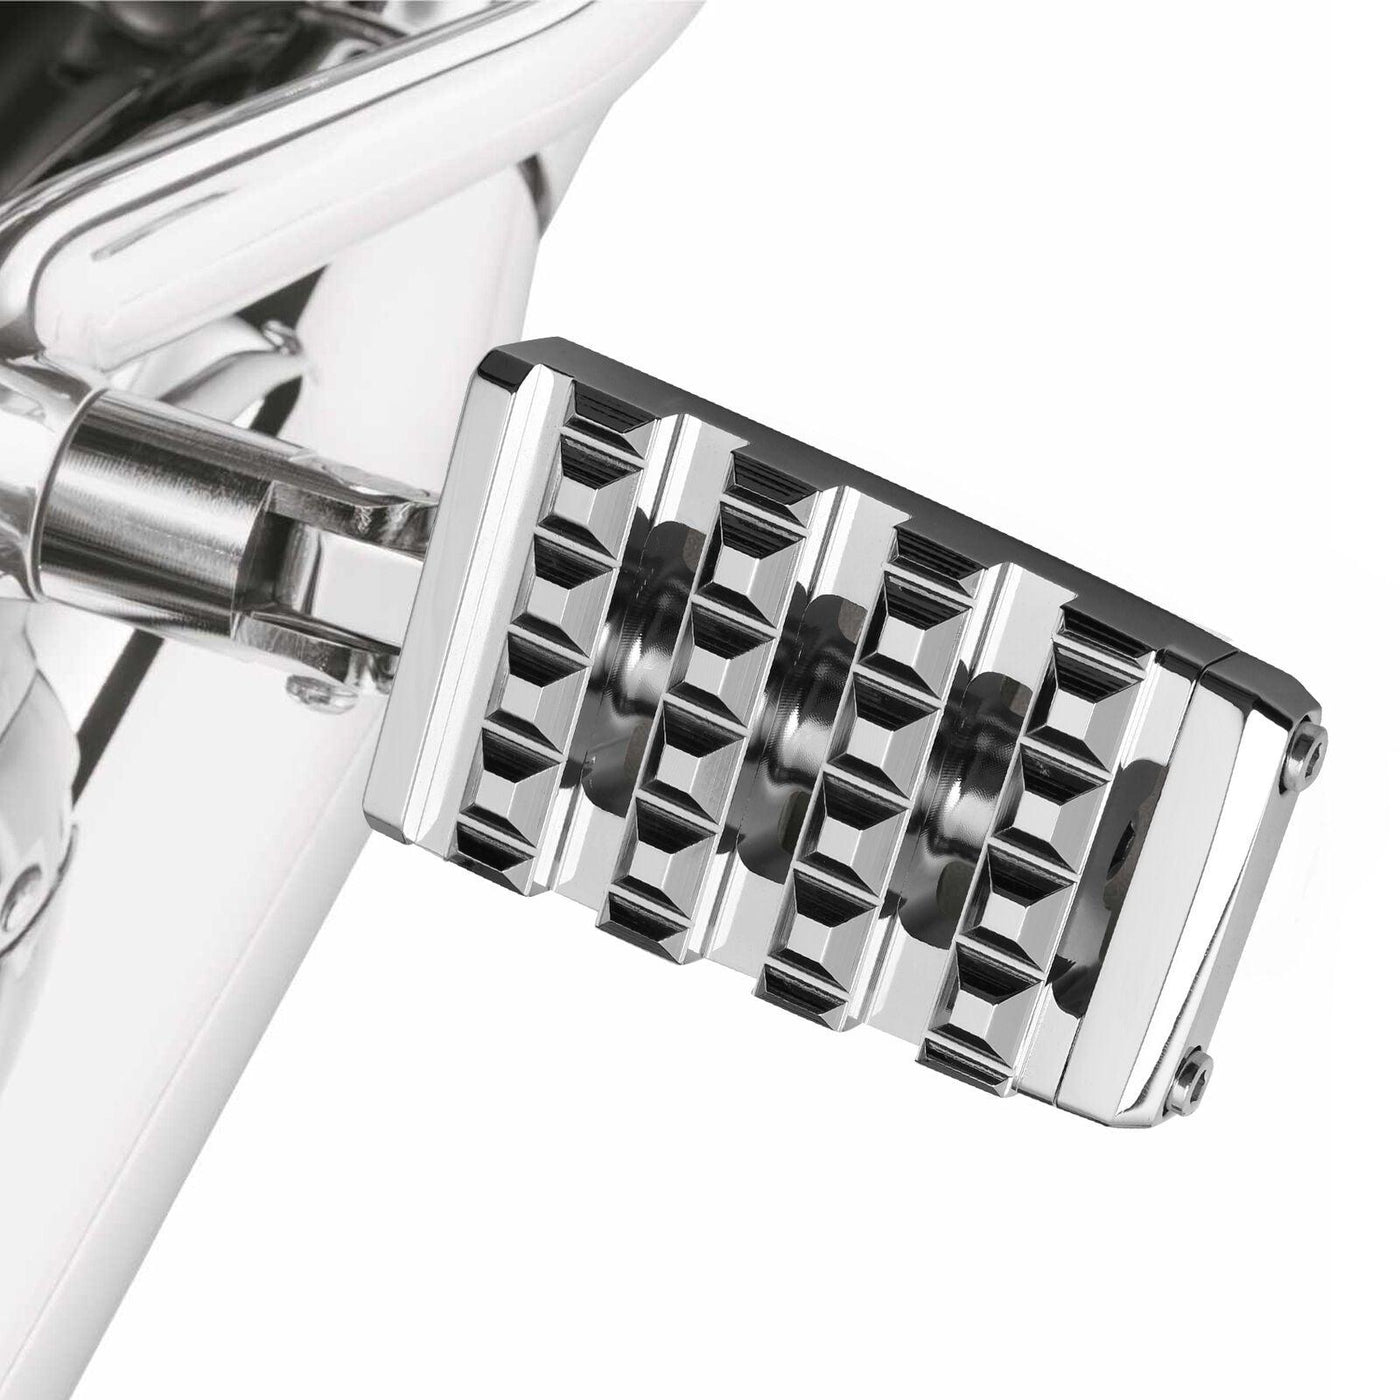 Chrome Footpeg FootRest Fit For Harley Male-mount Touring Sportster Dyna Fat Bob - Moto Life Products